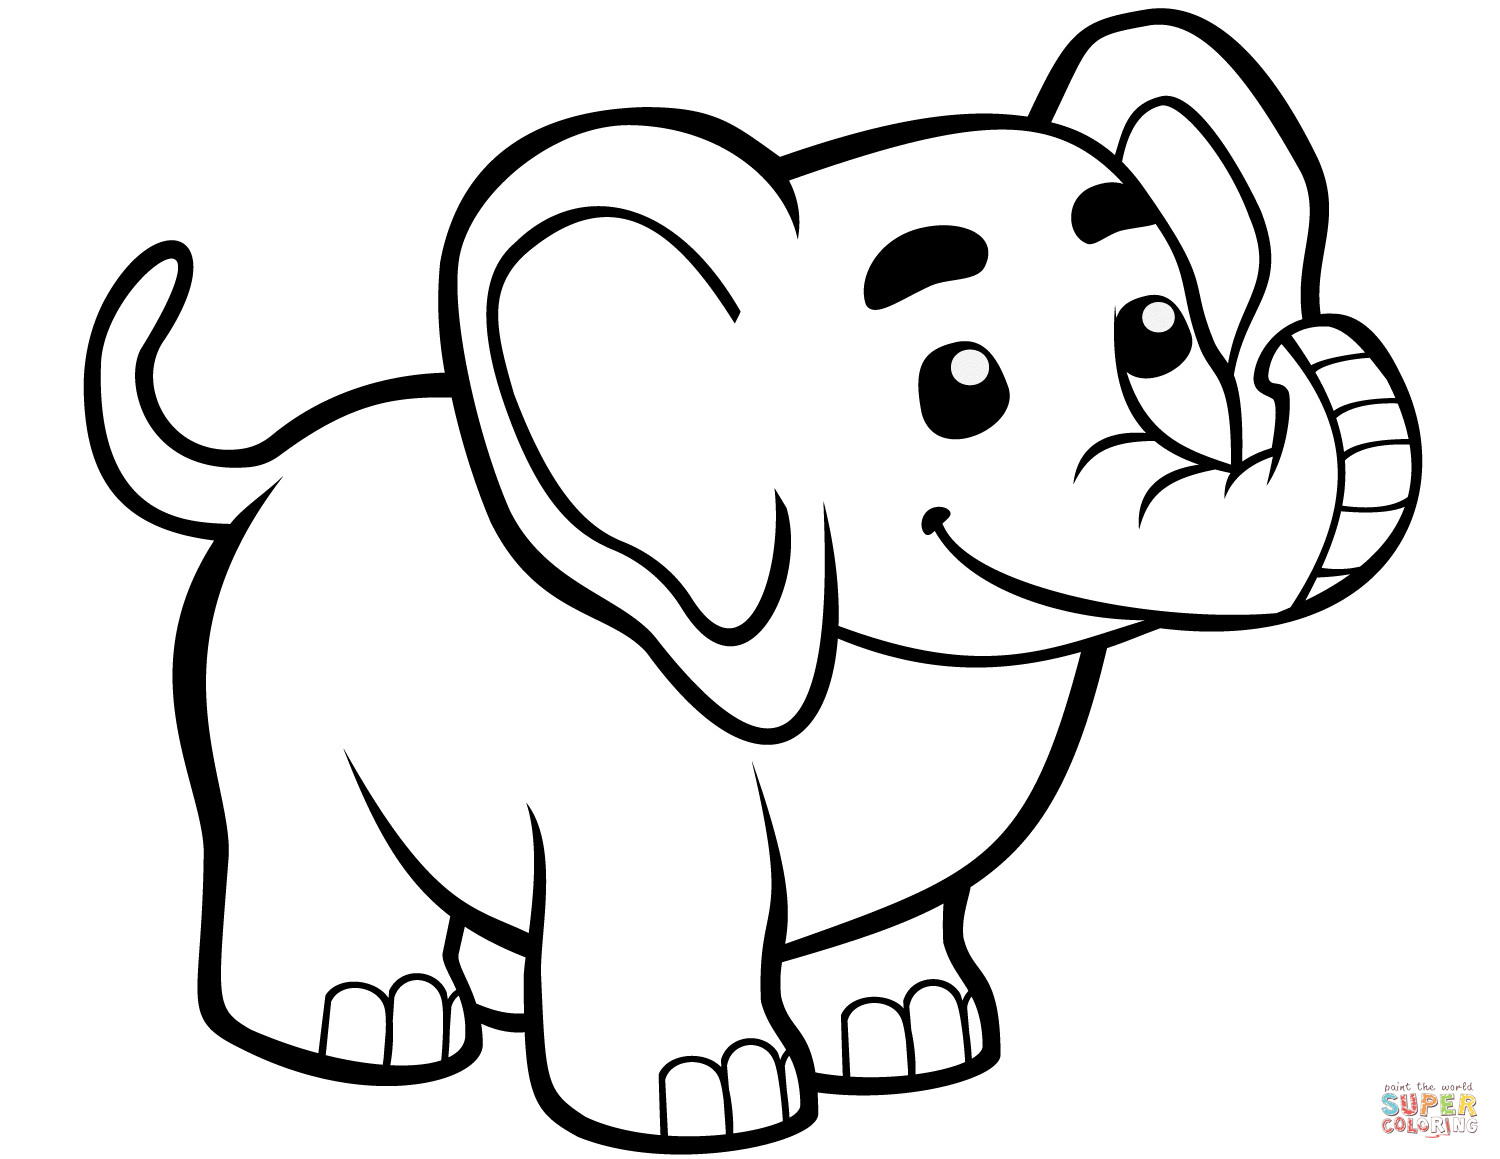 Baby Elephant Coloring Sheet
 Cute Baby Elephant coloring page